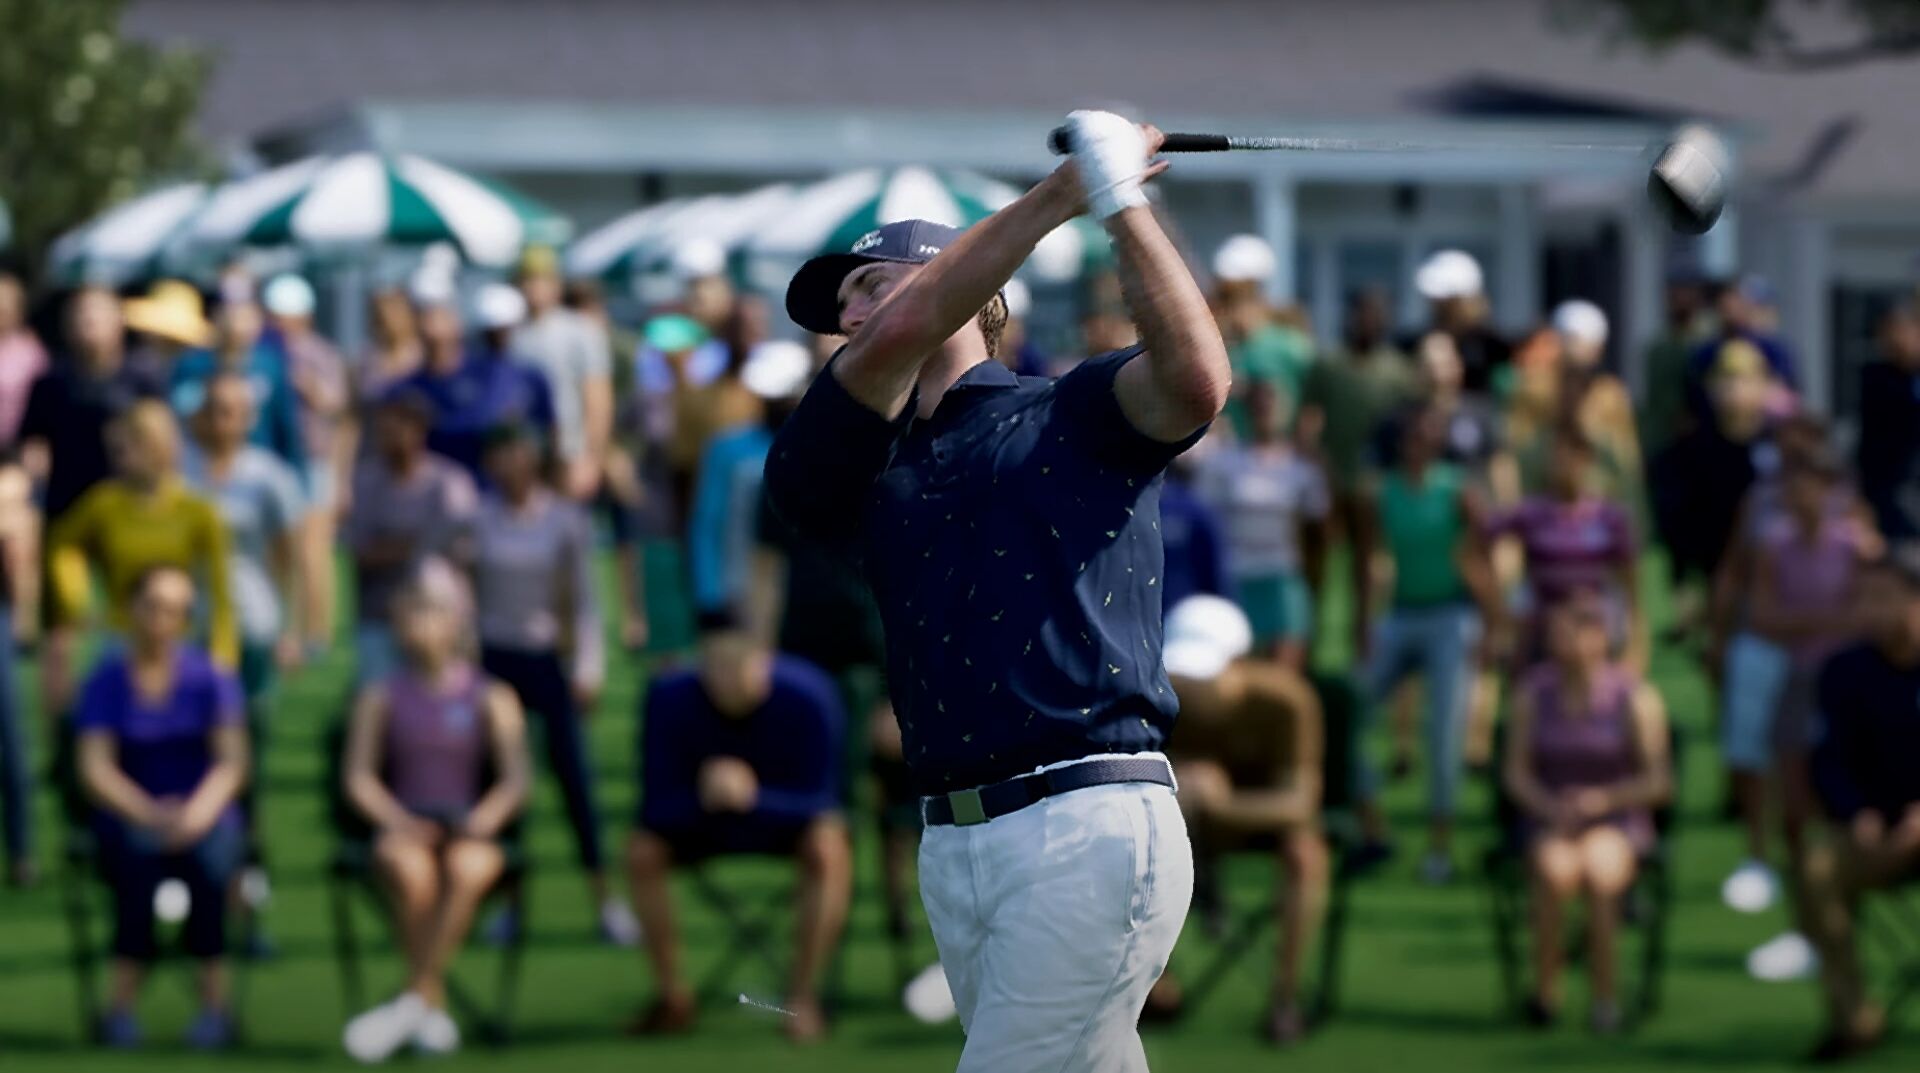 EA show first teaser trailer for EA Sports PGA Tour, just as 2K’s PGA Tour 2K23 comes out